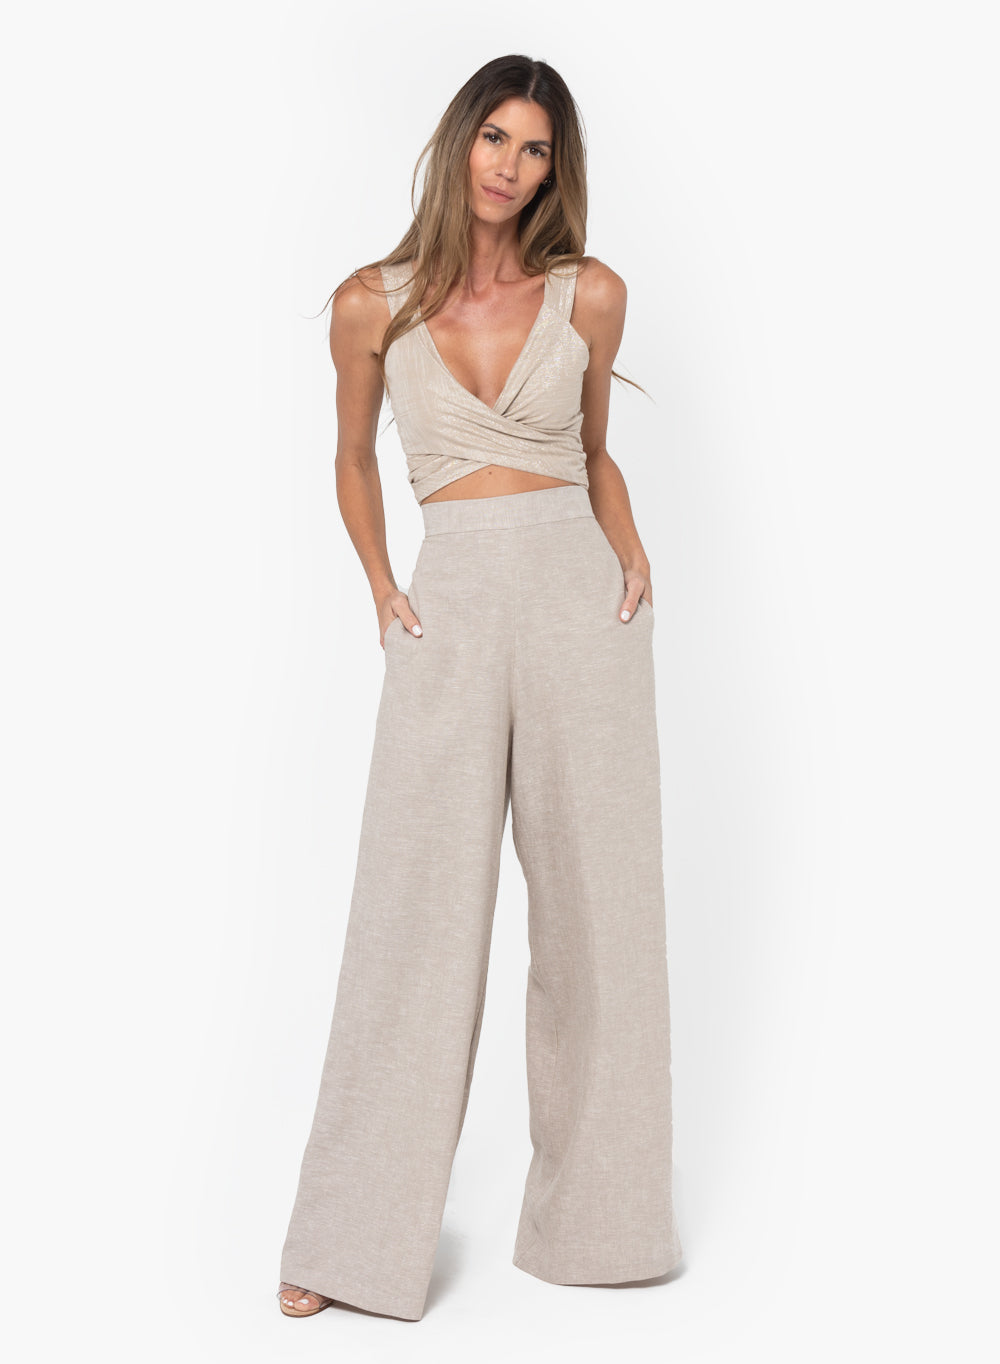 Andrea Linen Rayon Pant in Flax